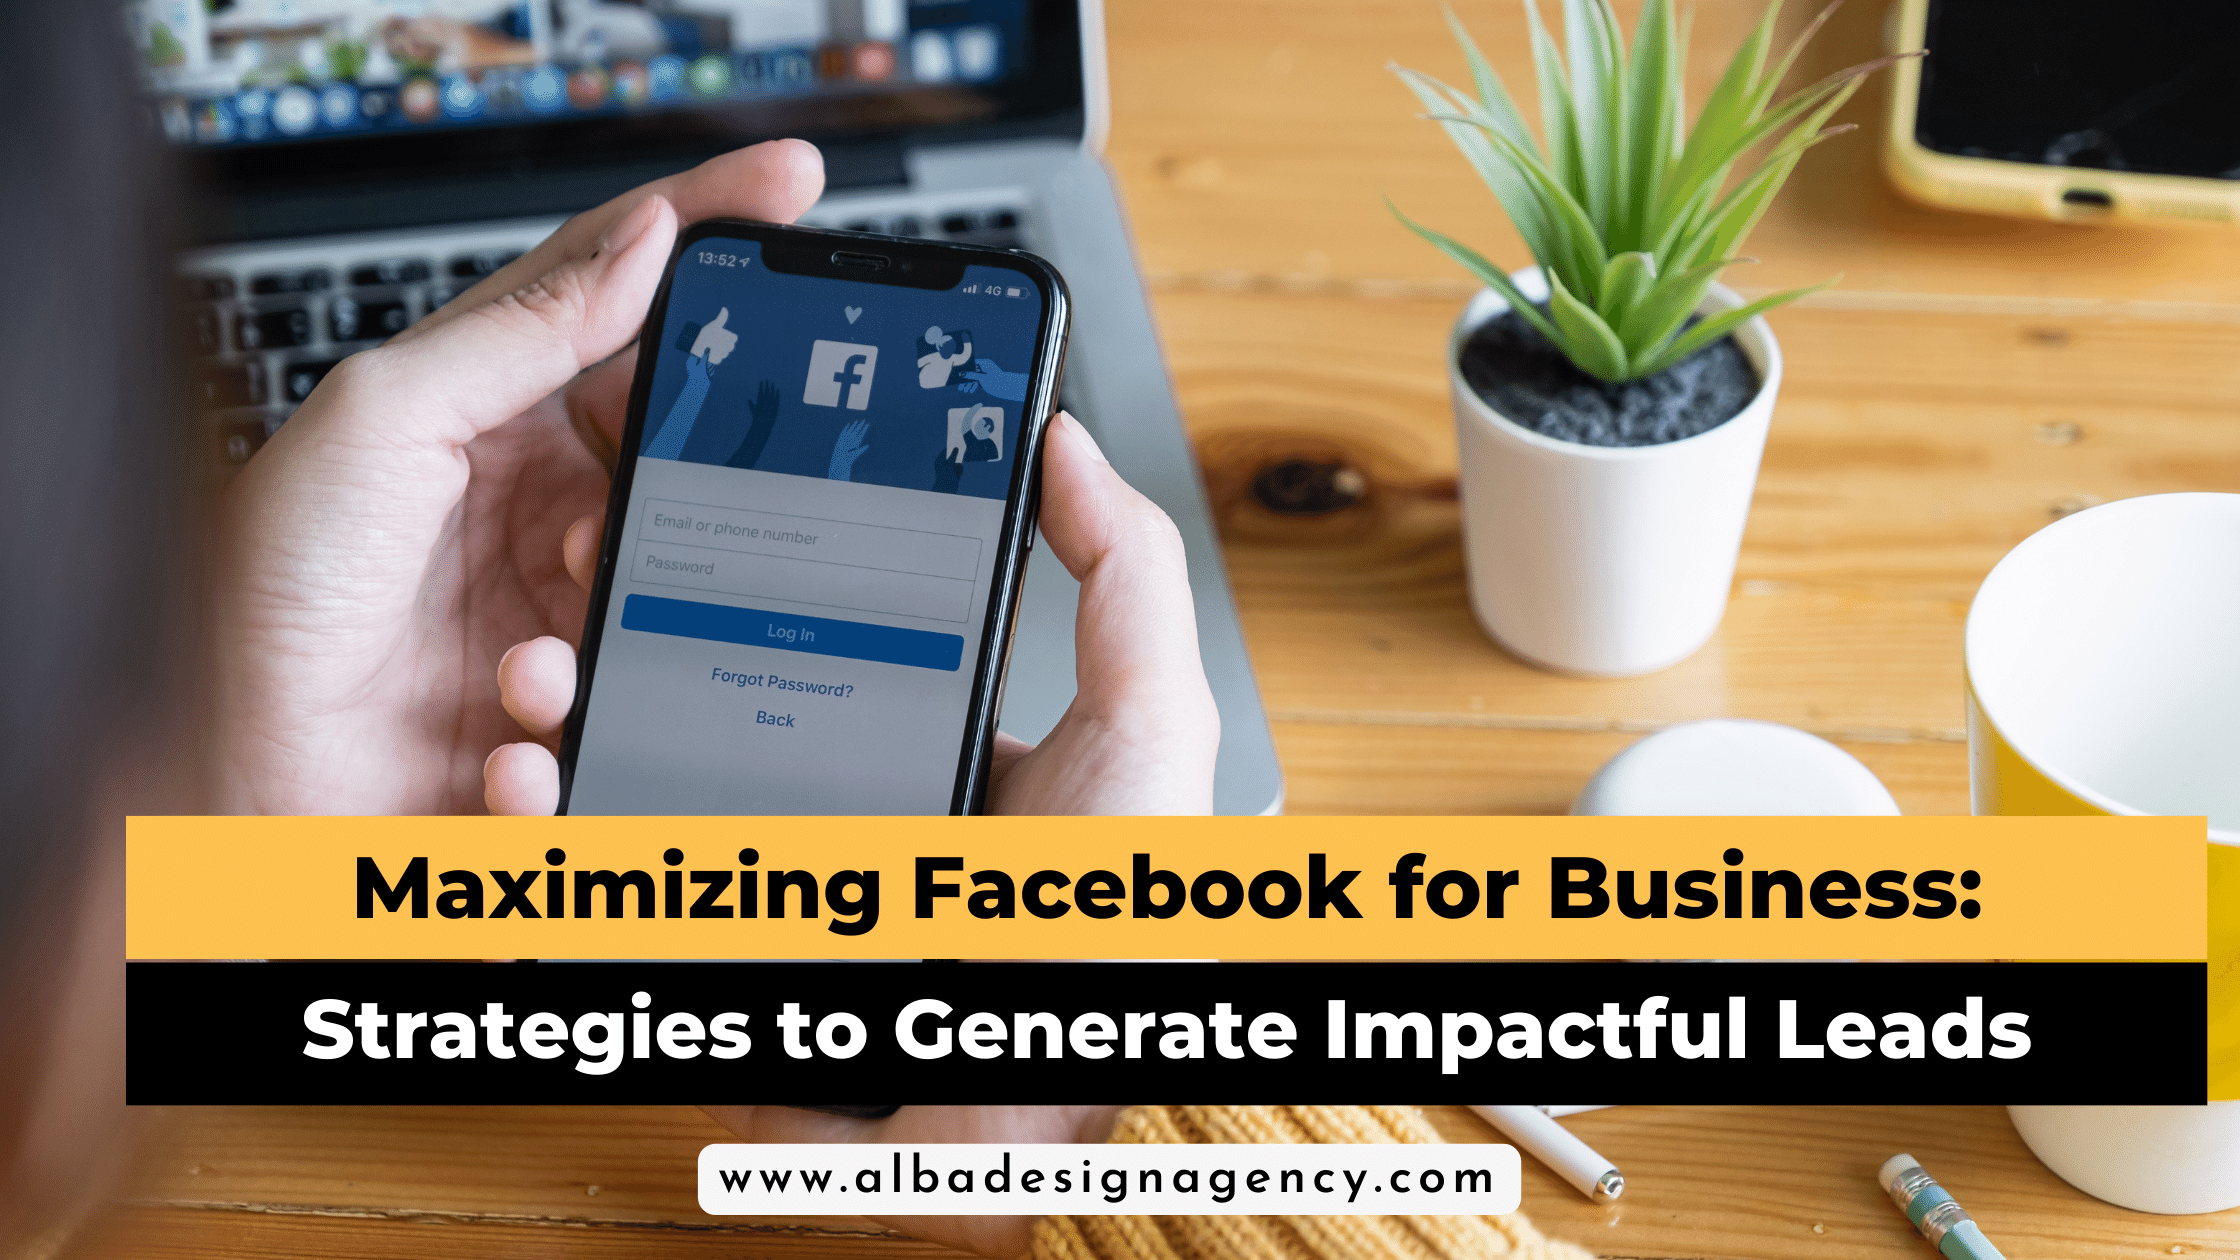 Facebook-for-Business